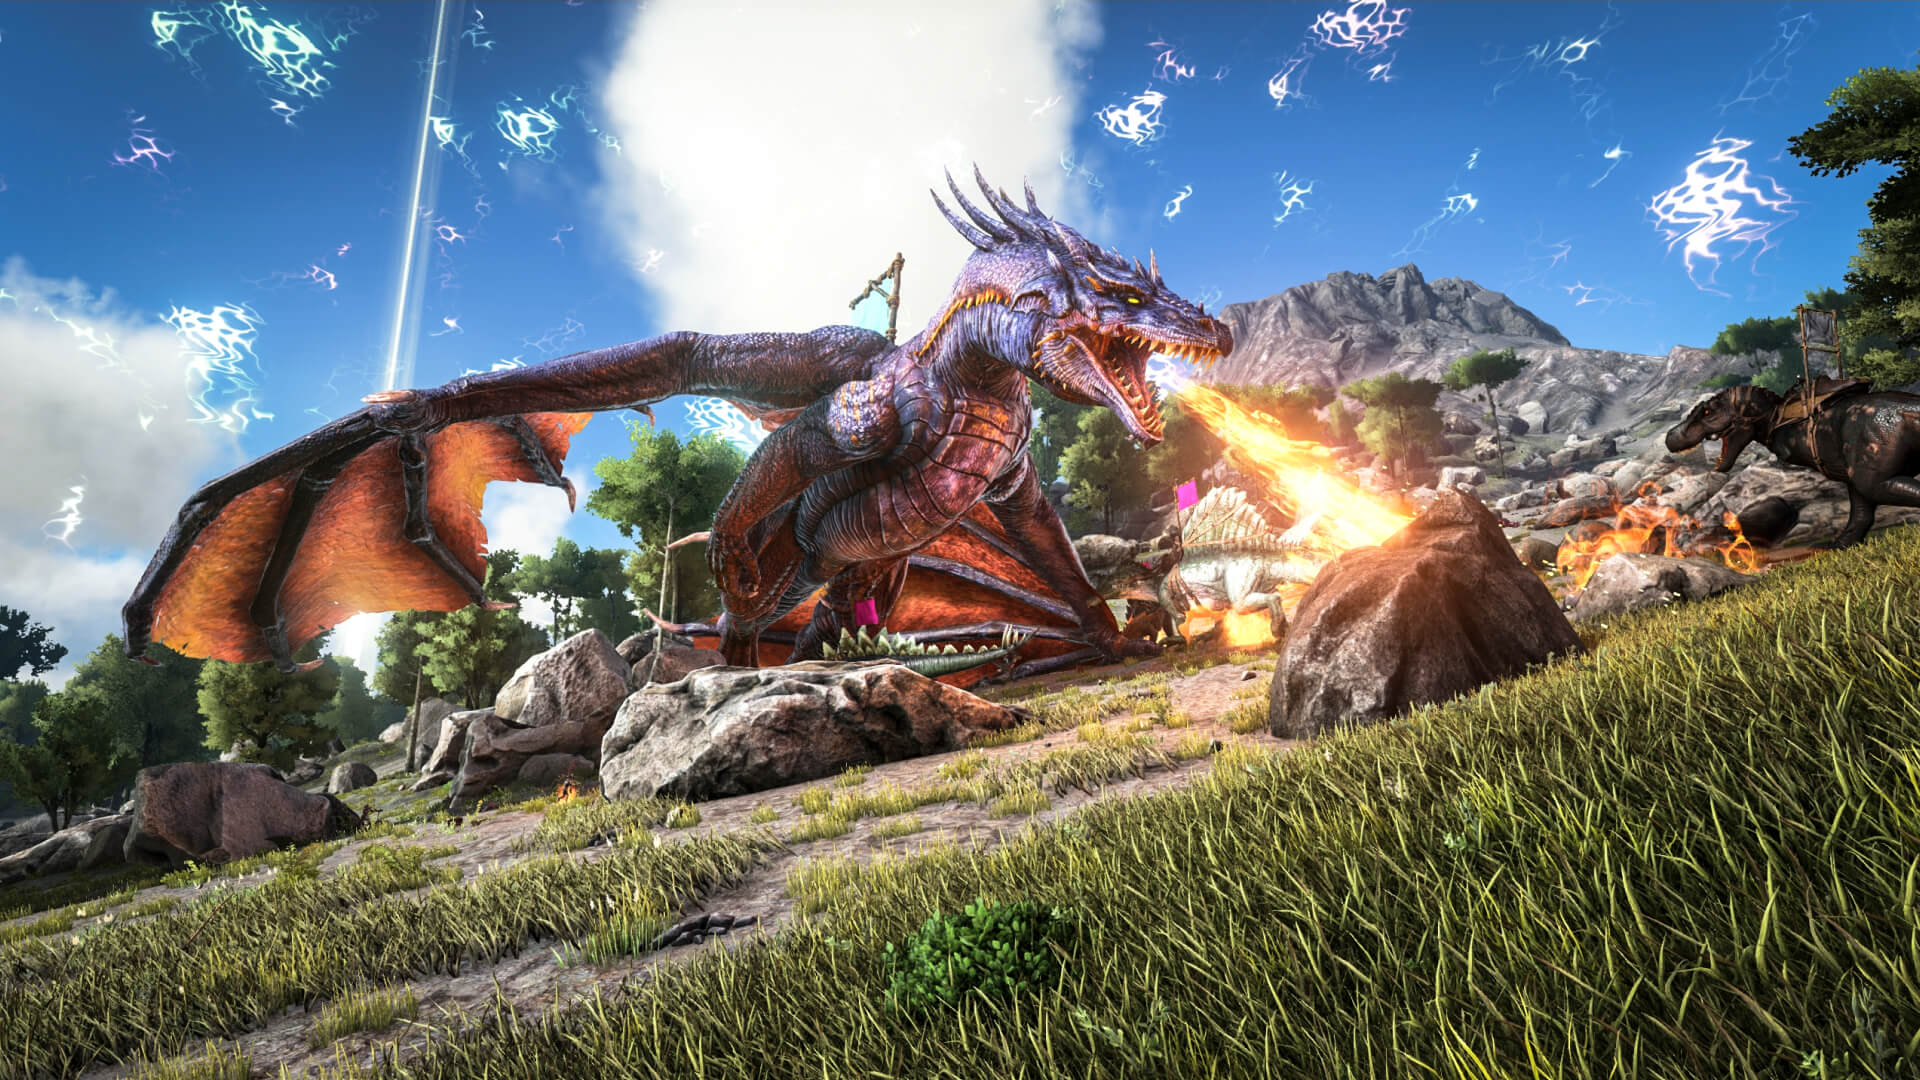 Survival of the Fittest - ARK: Survival Evolved Wiki